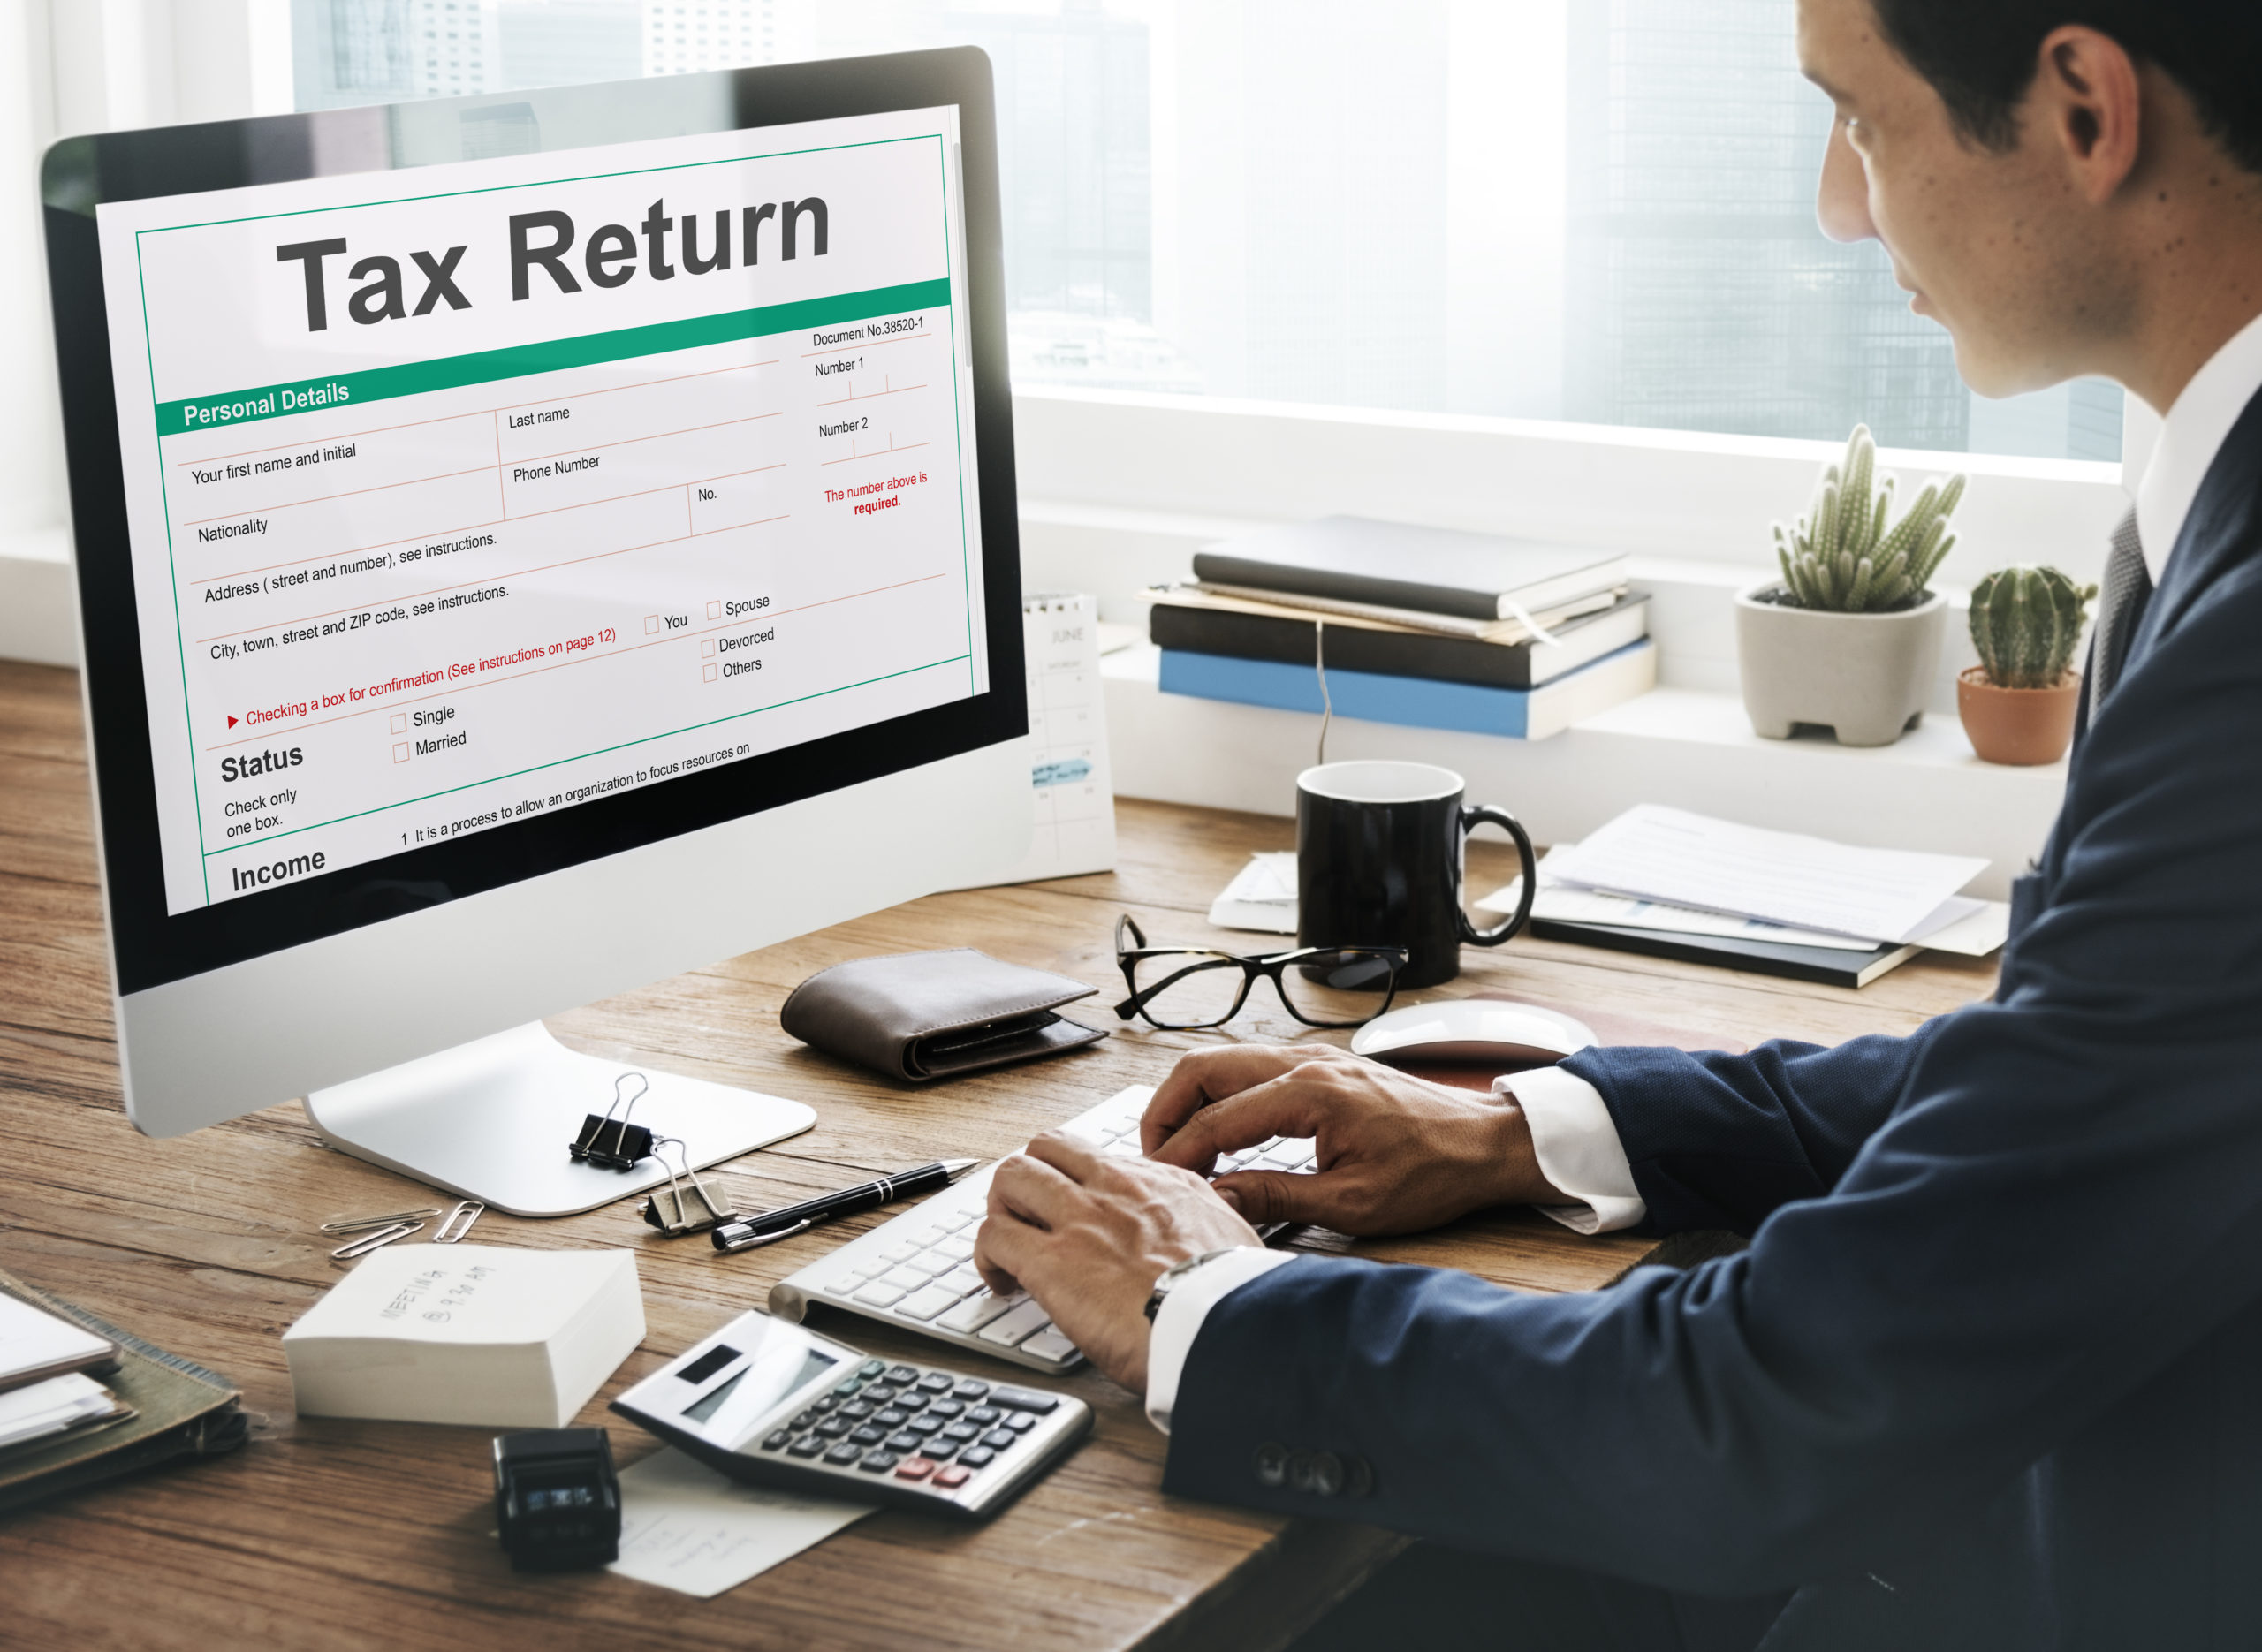 Discover the Benefits of Tax Preparation Services For CPAs & Accounting Firms | Image by rawpixel.com on Freepik